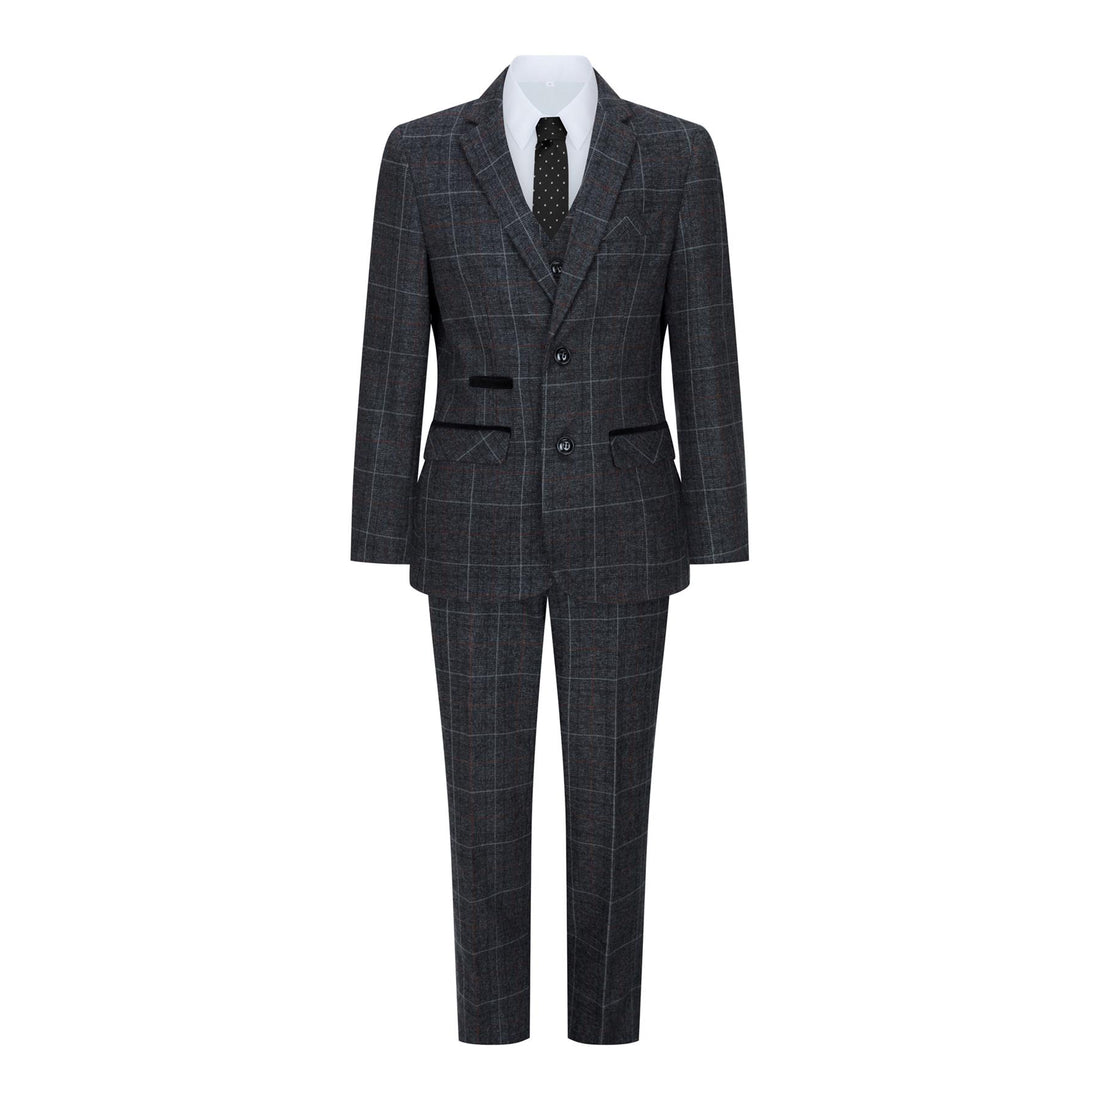 Boys 3 Piece Charcoal Grey Tweed Check Vintage Retro Suit - Upperclass Fashions 